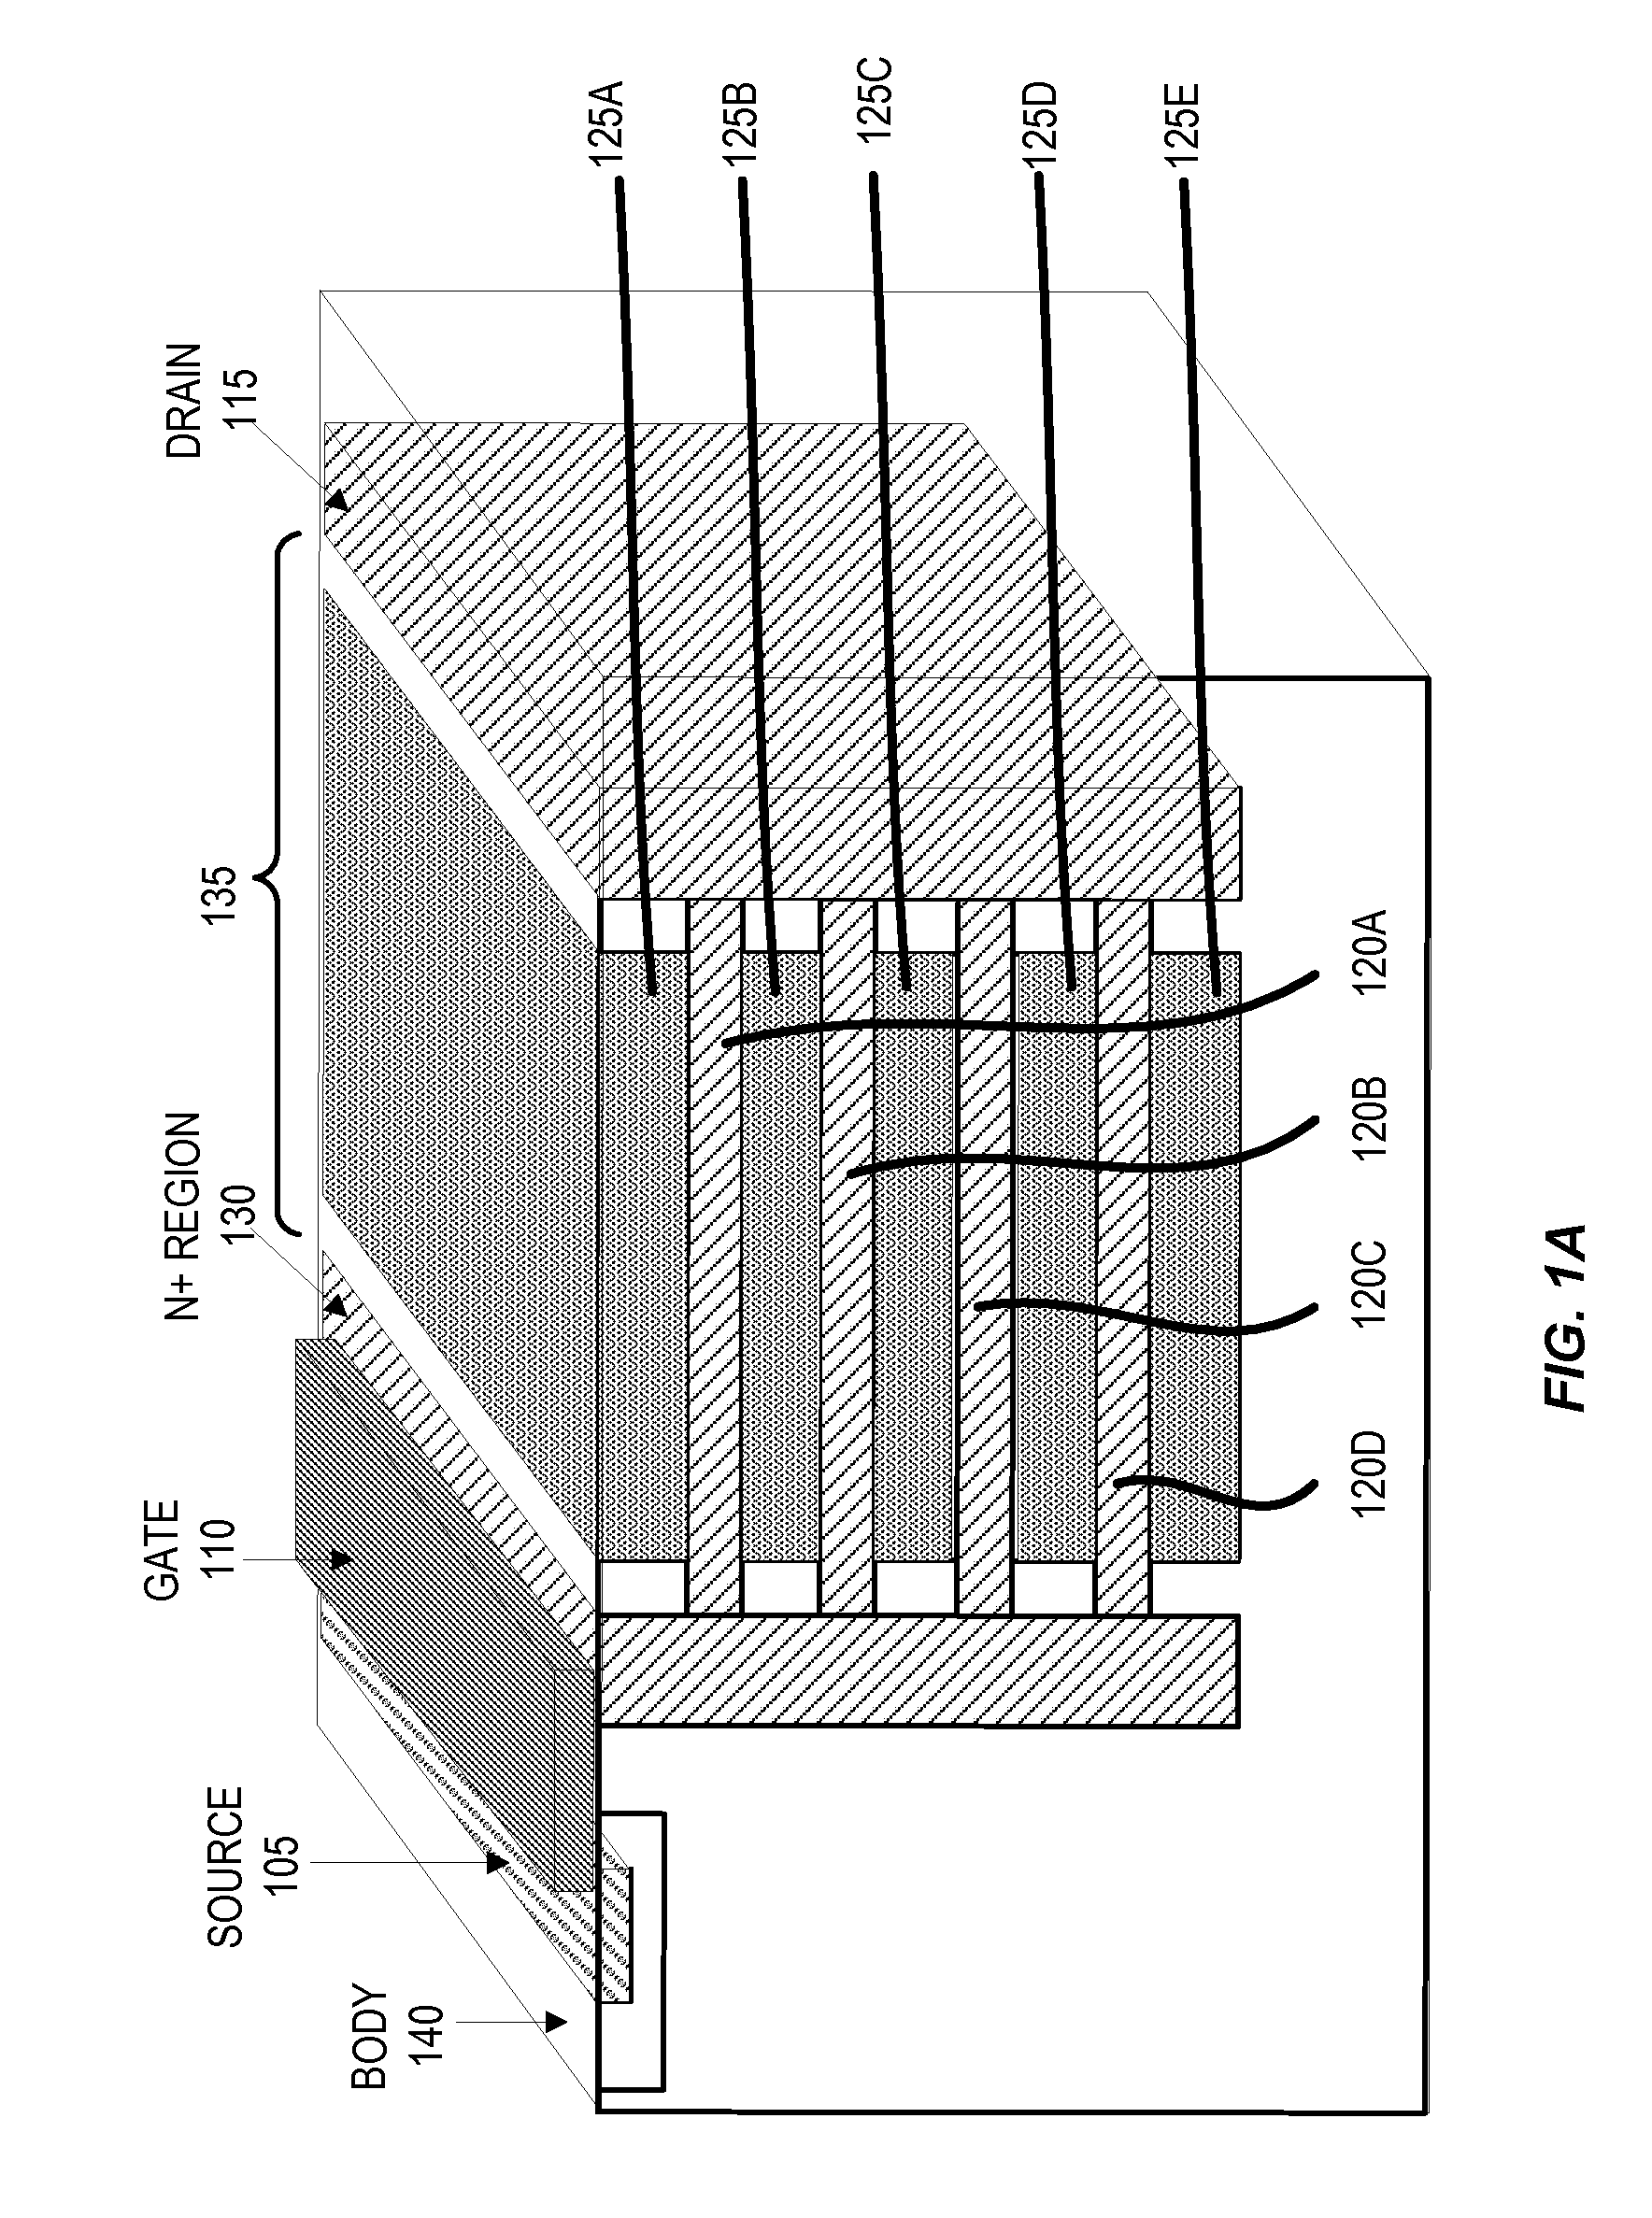 Multi-level Lateral Floating Coupled Capacitor Transistor Structures